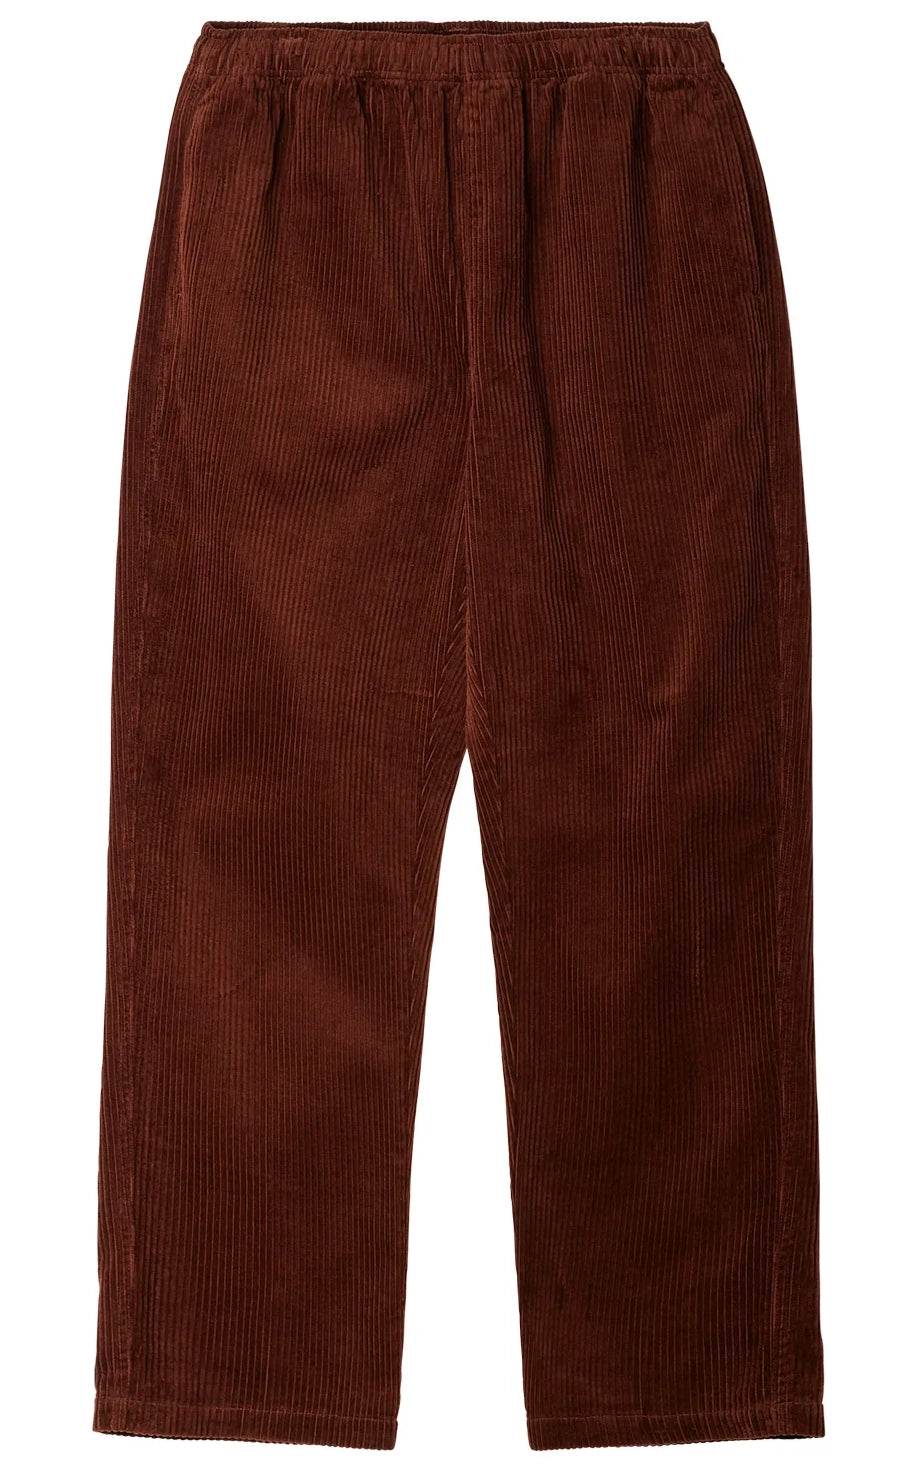 Unisex Easy Cord Pant in 'Sepia'